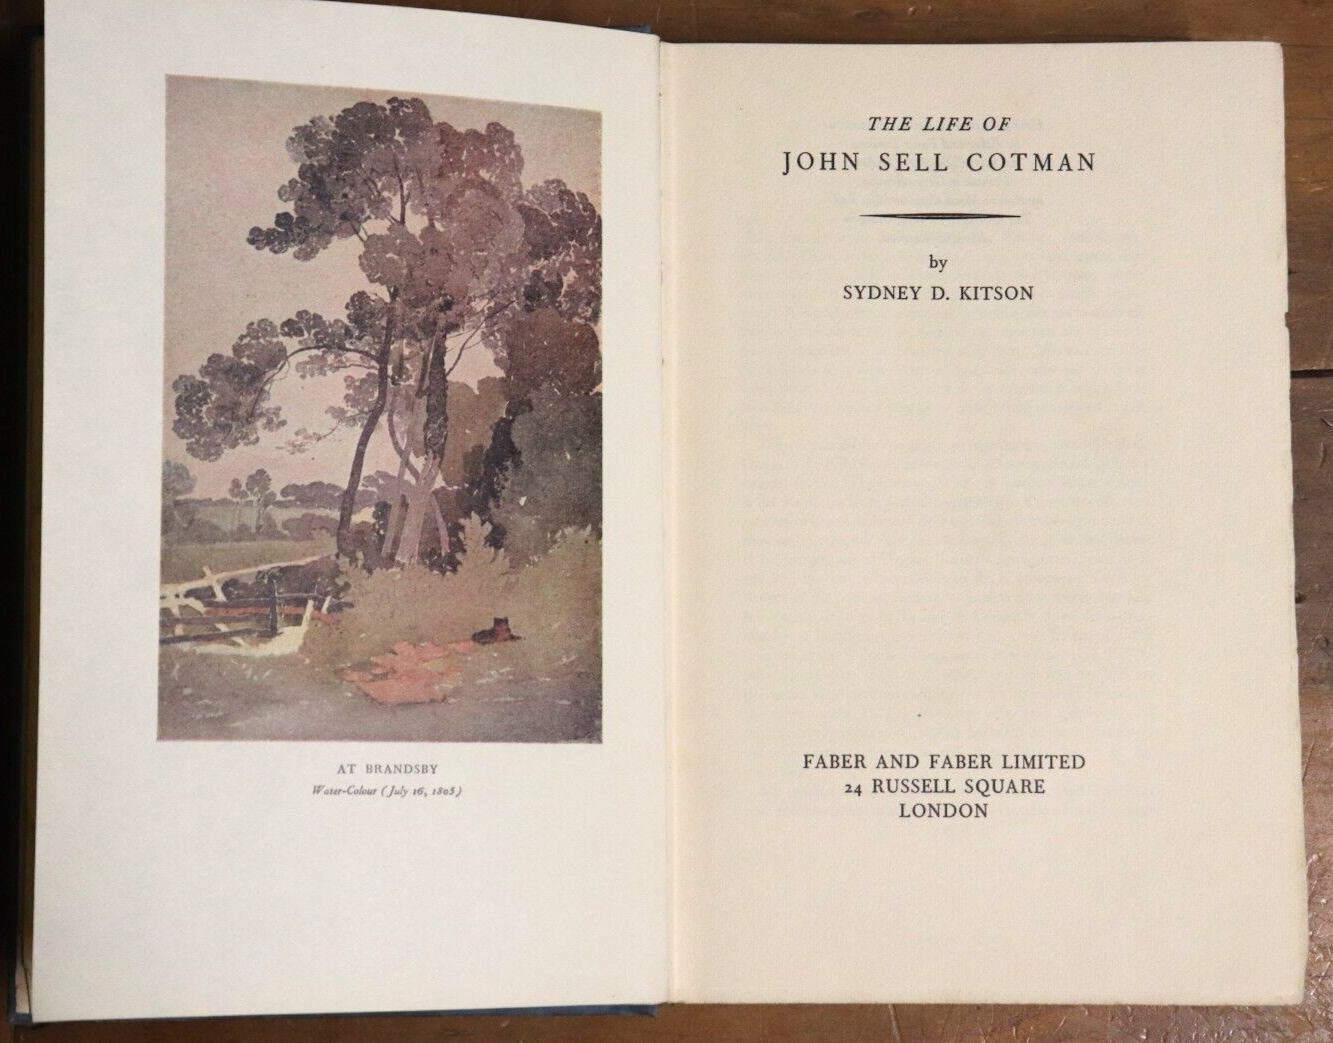 1937 The Life Of John Sell Cotman 1st Edition Antique English Art Book - 0